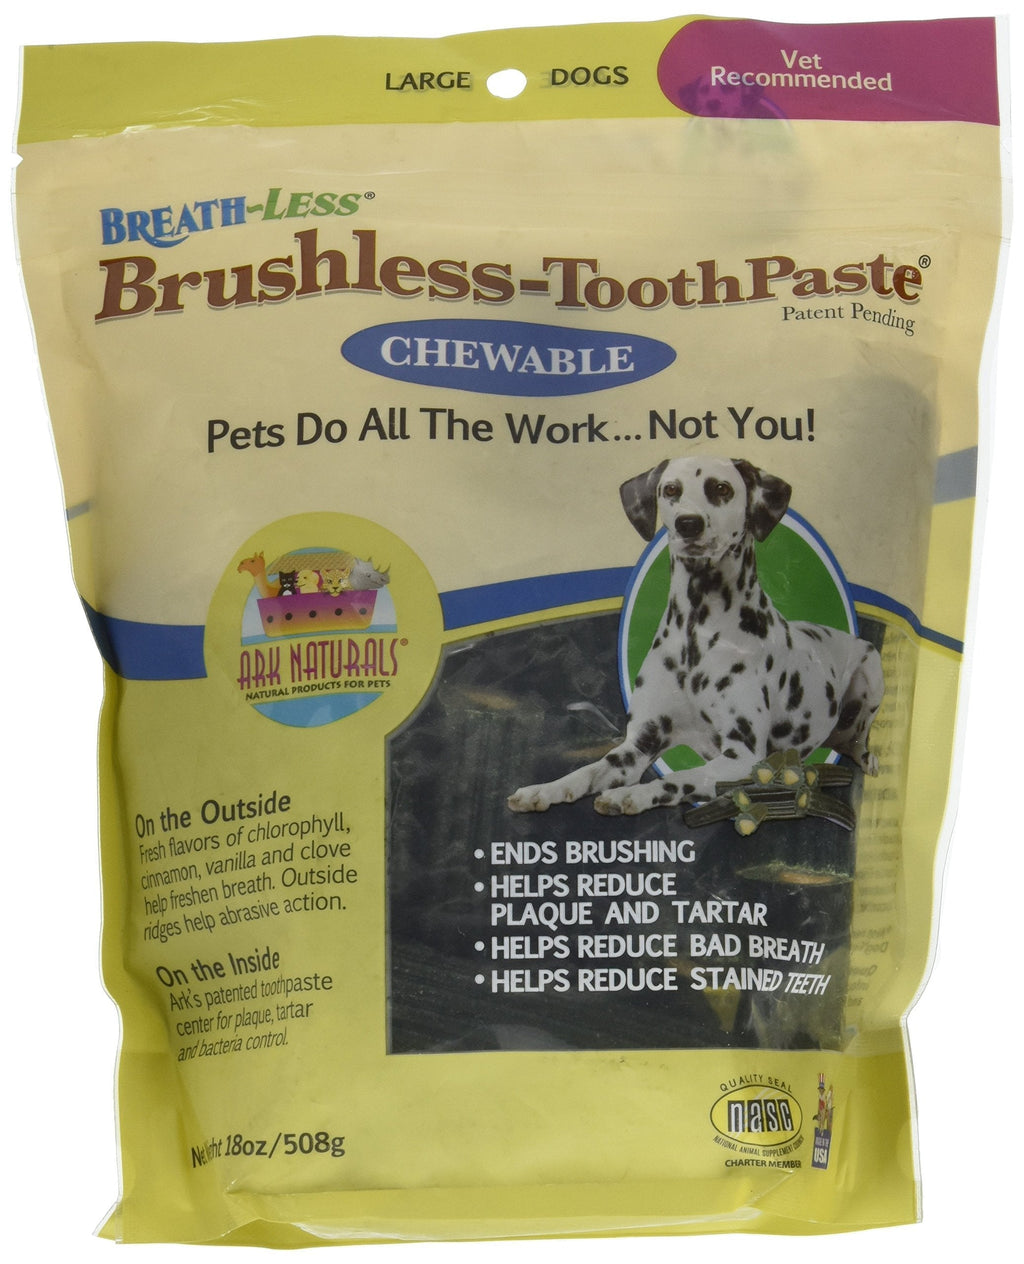 ARK NATURALS Breath-Less Brushless-Toothpaste - Chewable - Large Dogs - 18 oz - PawsPlanet Australia